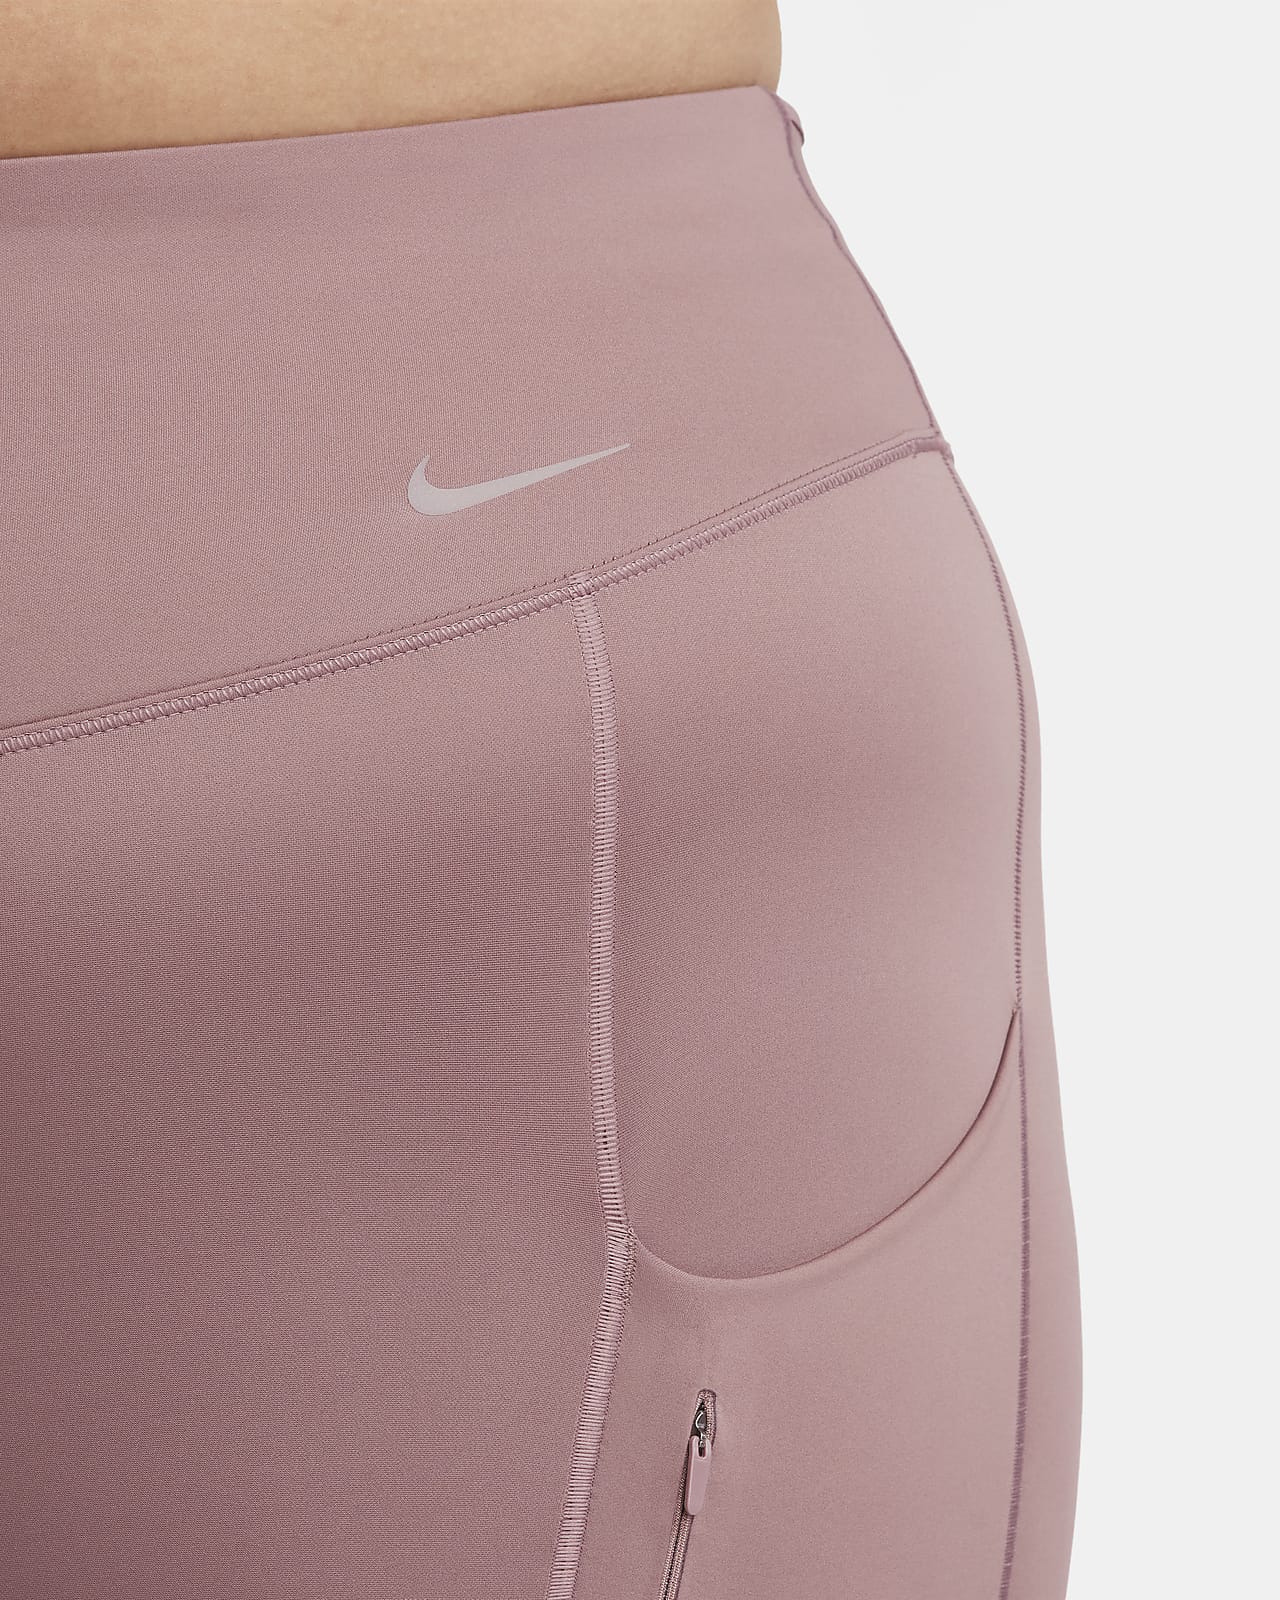 Womens high waisted compression 7/8 leggings Nike W NP DF SSNL HR TIGHT FF  W pink